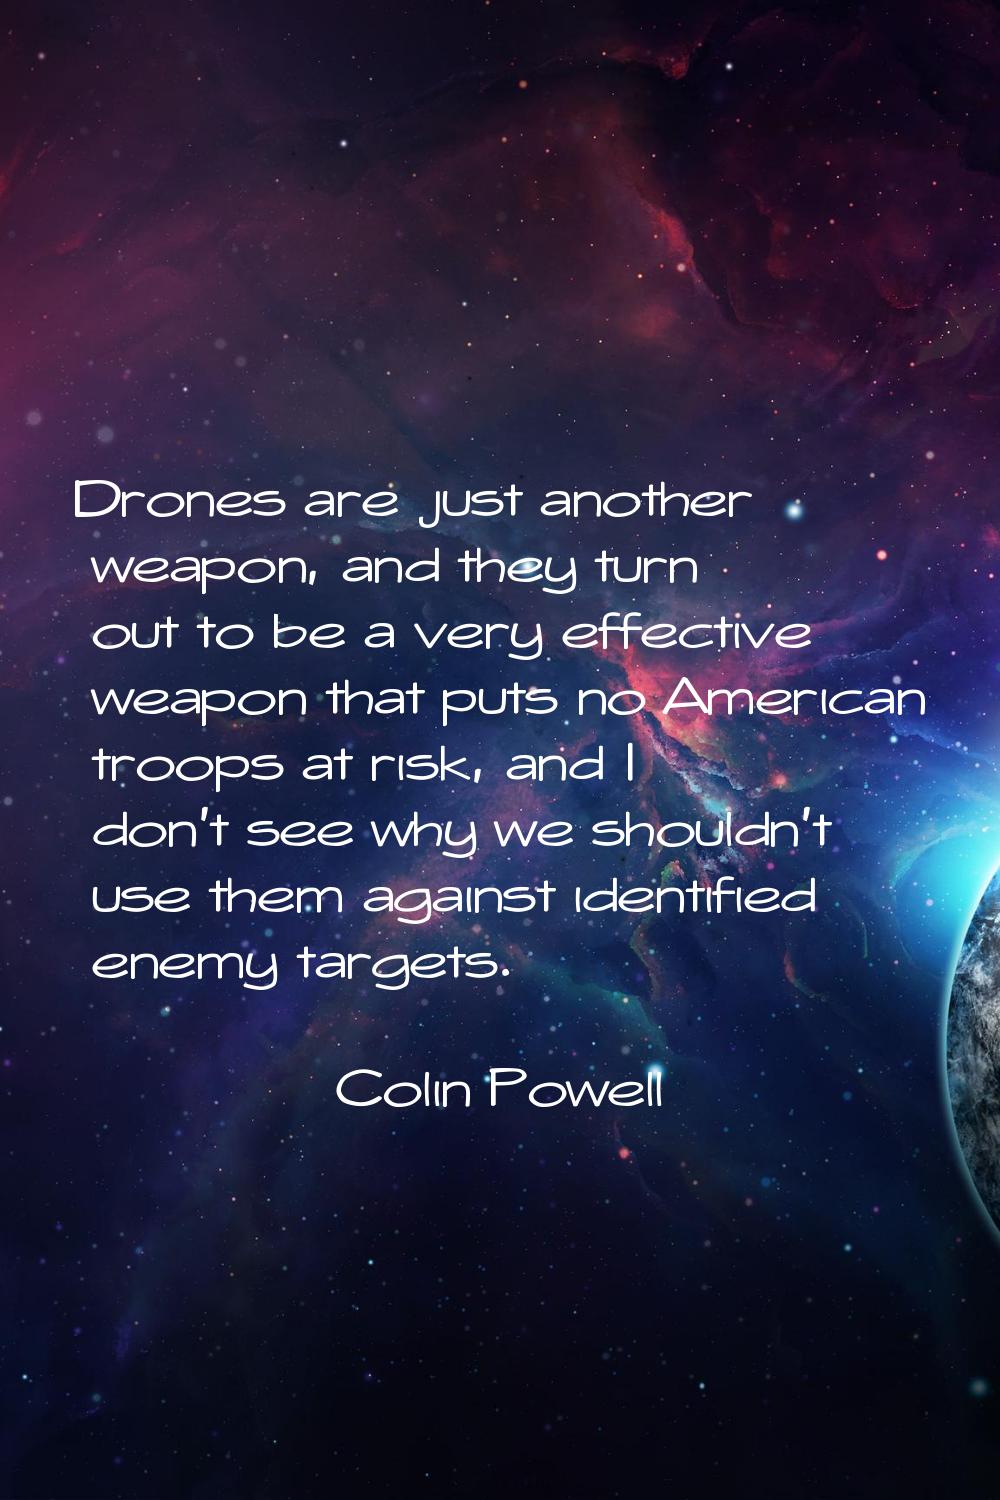 Drones are just another weapon, and they turn out to be a very effective weapon that puts no Americ